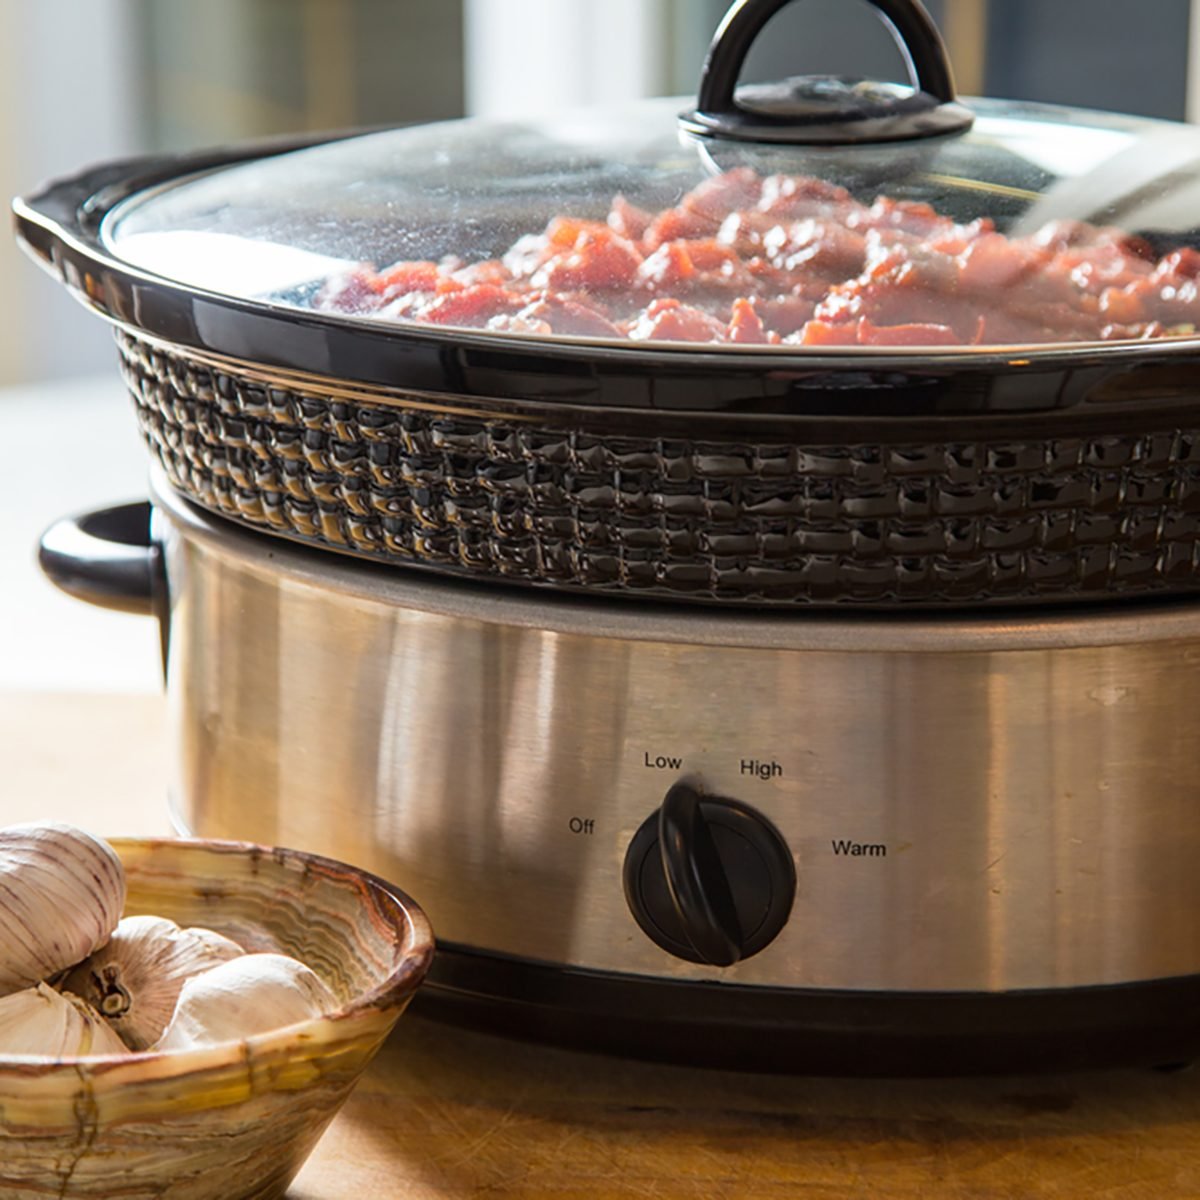 Should You Lock The Lid On A Slow Cooker When Cooking?